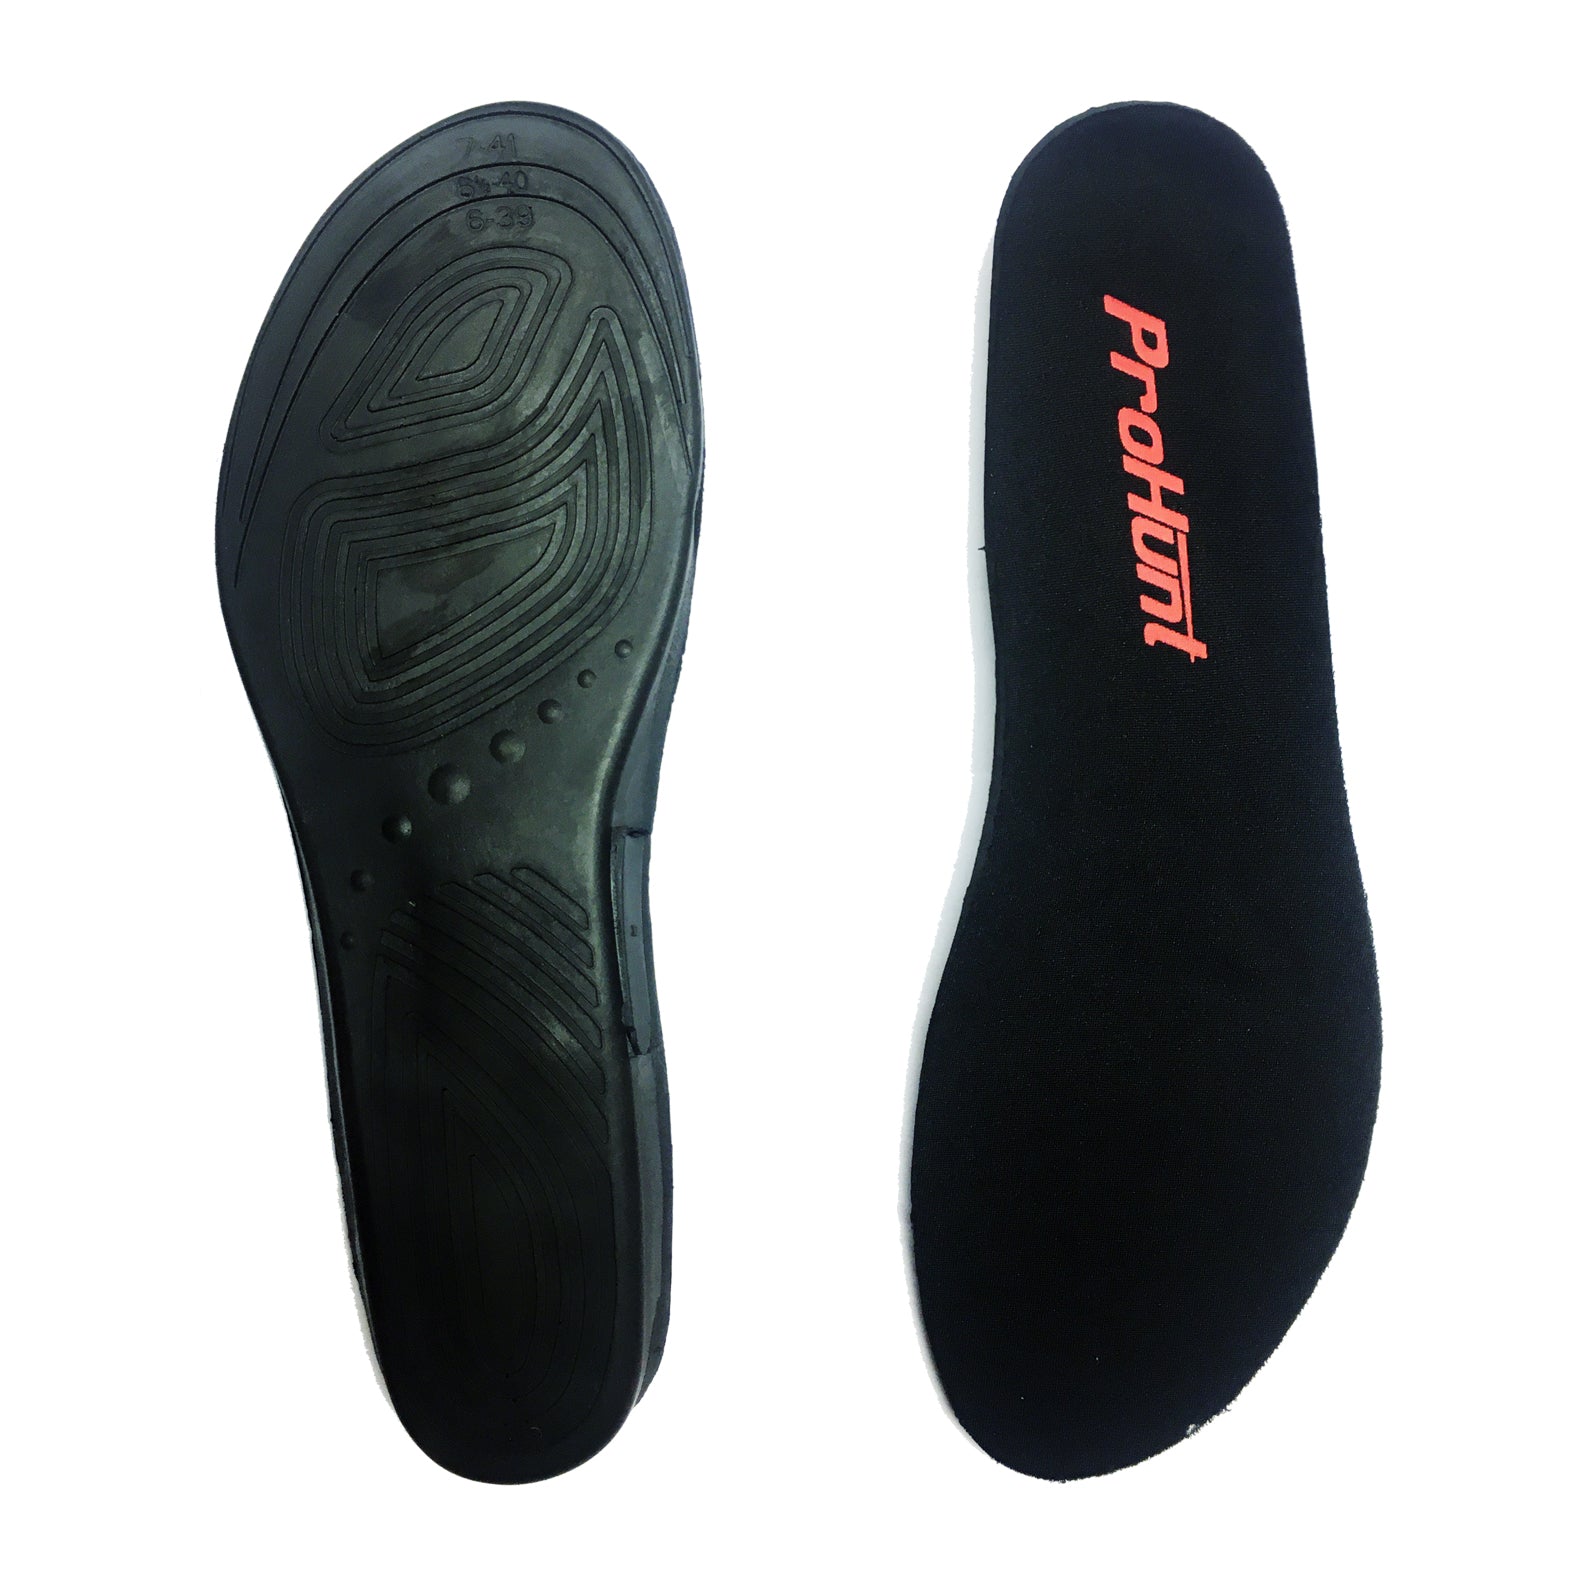 Verney-Carron-Pro-Hunt-Heated-Insoles-with-Remote